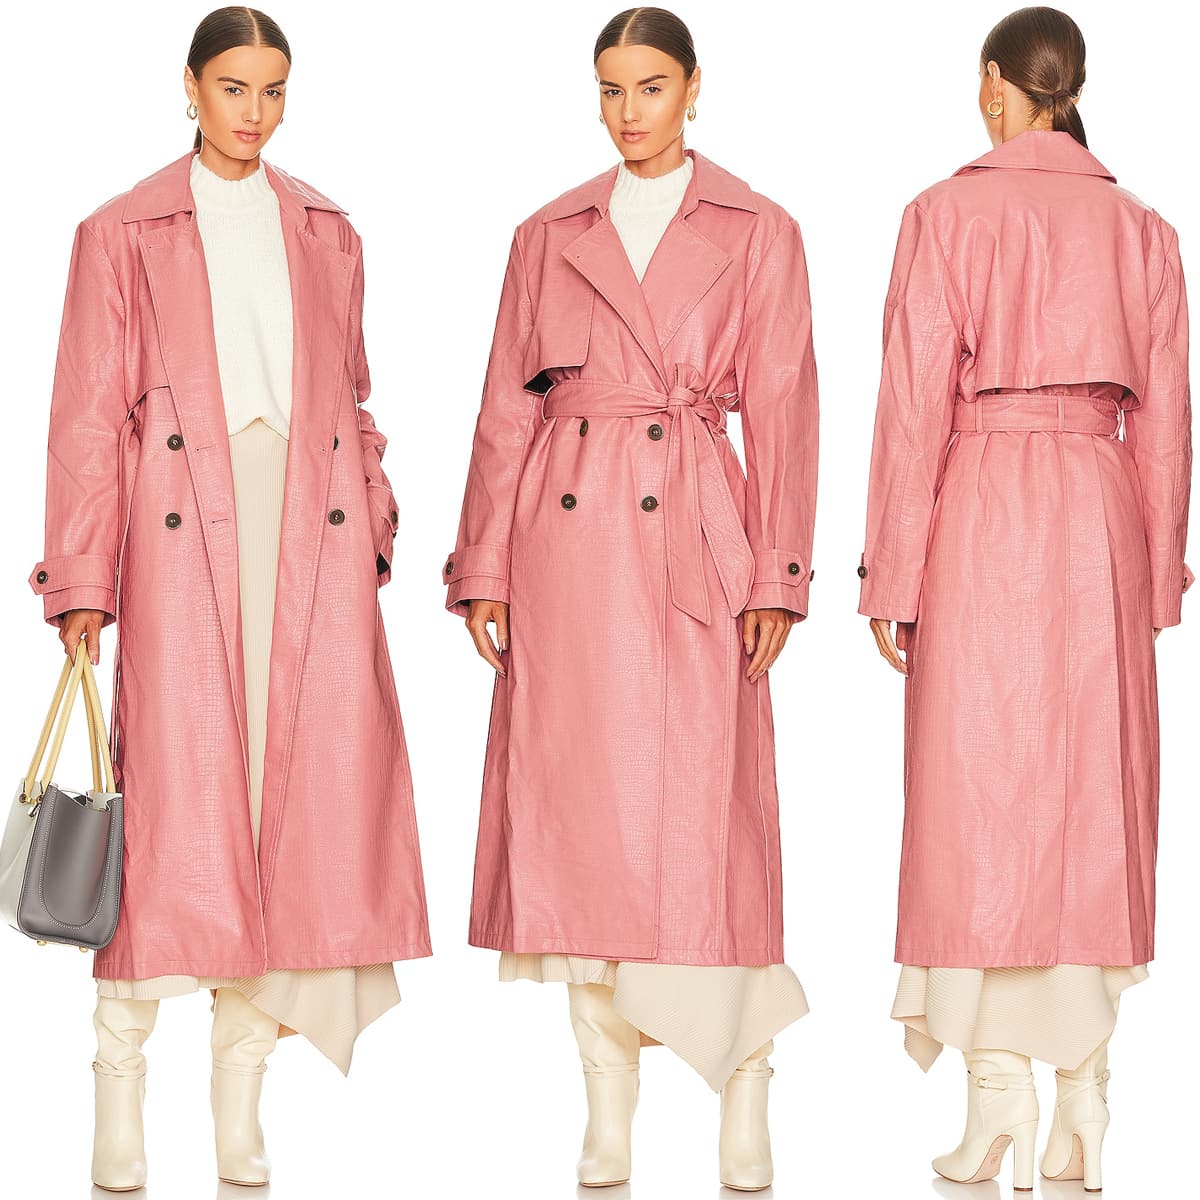 Pretty in pink, Free People's Morrison trench coat is crafted from croc-embossed viscose with polyurethane coating, notched lapels, front buttons, and a detachable waist belt